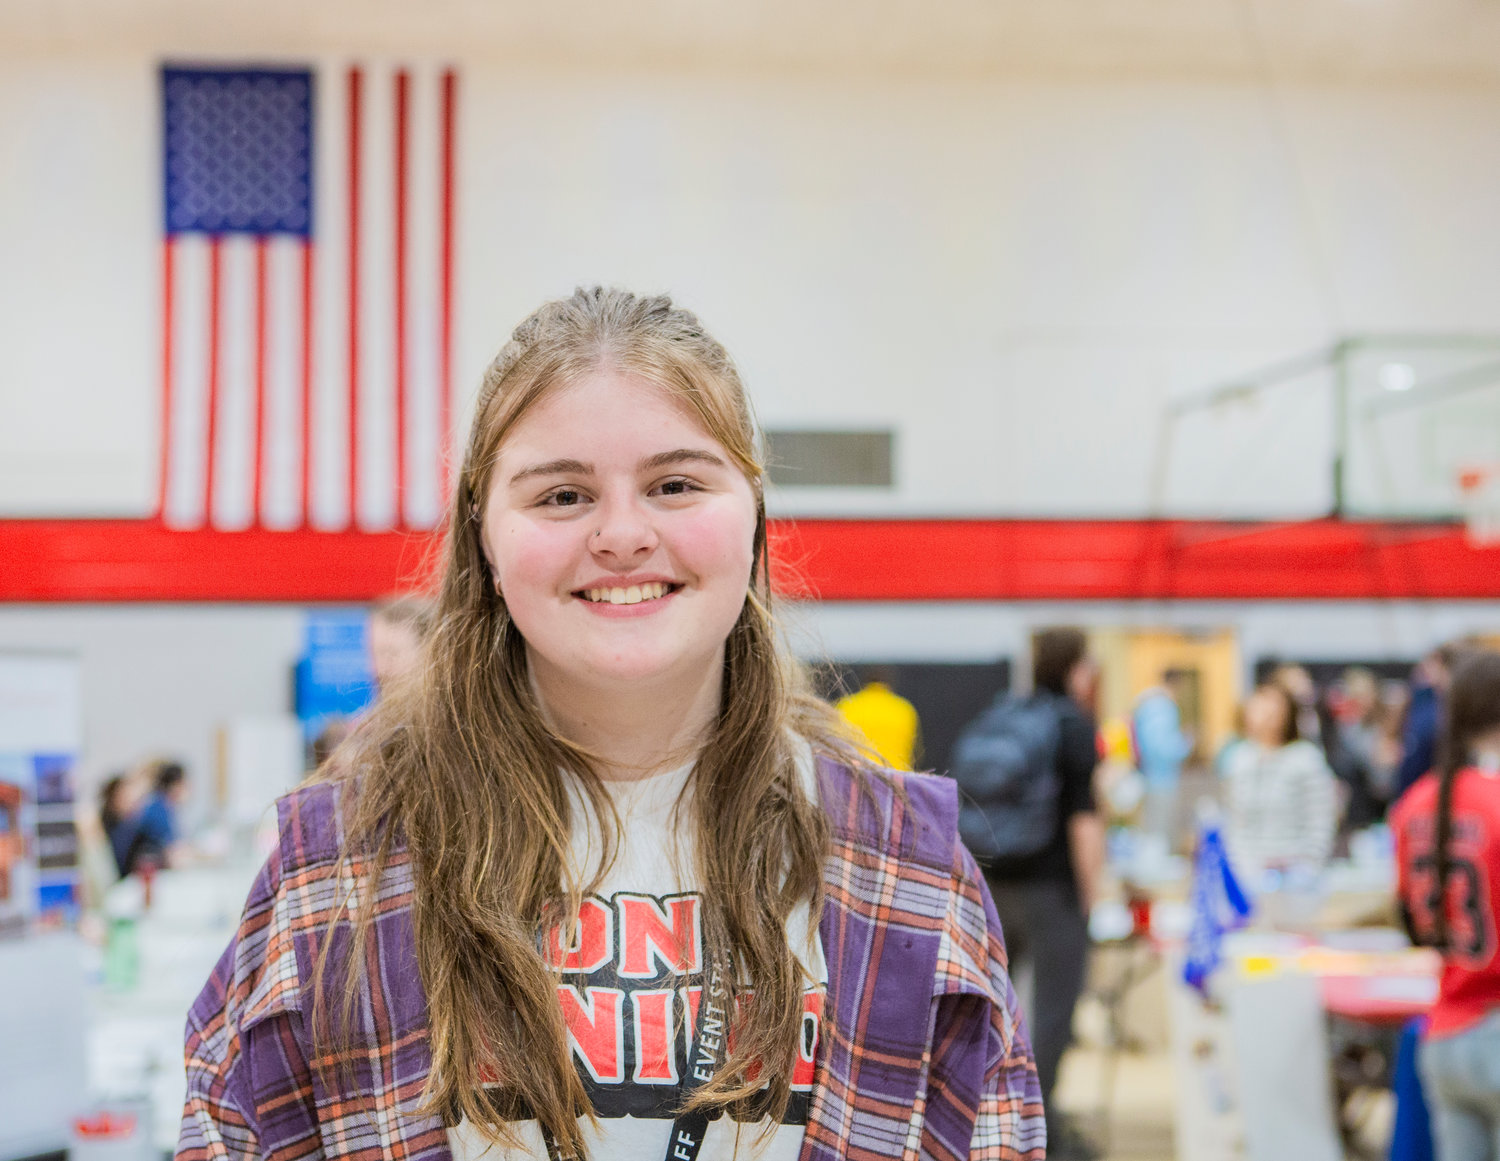 Tenino High School student Holly Thoren, the lead organizer of the school’s college and career fair, smiles in the gymnasium on Thursday morning as students flock to tables with recruiters and educators.